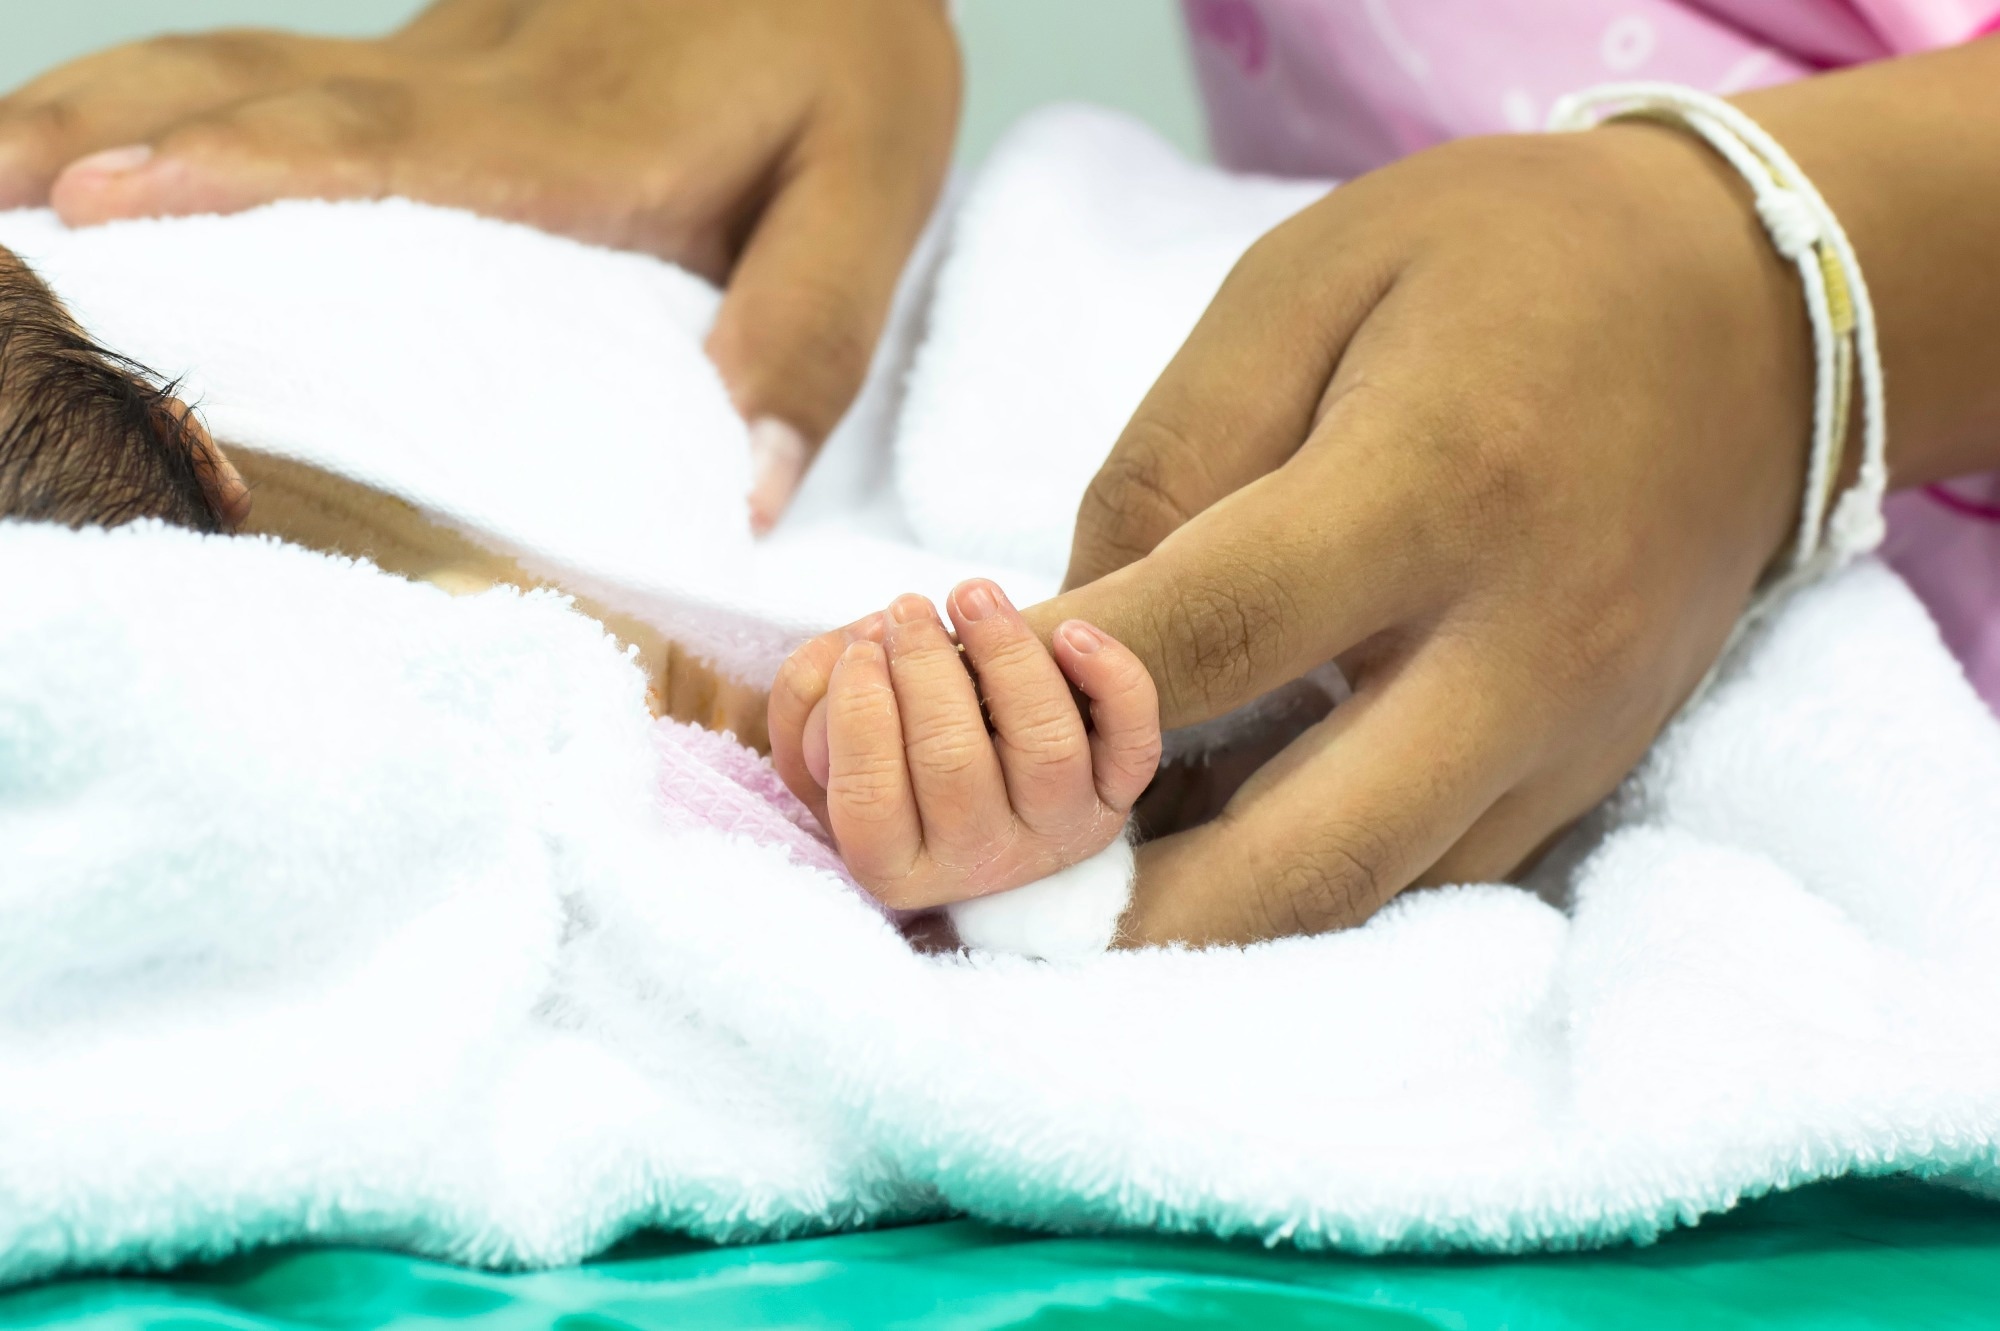 Study: Effects of COVID-19 pandemic on low birth weight in a nationwide study in India. Image Credit: Zetar Infinity/Shutterstock.com